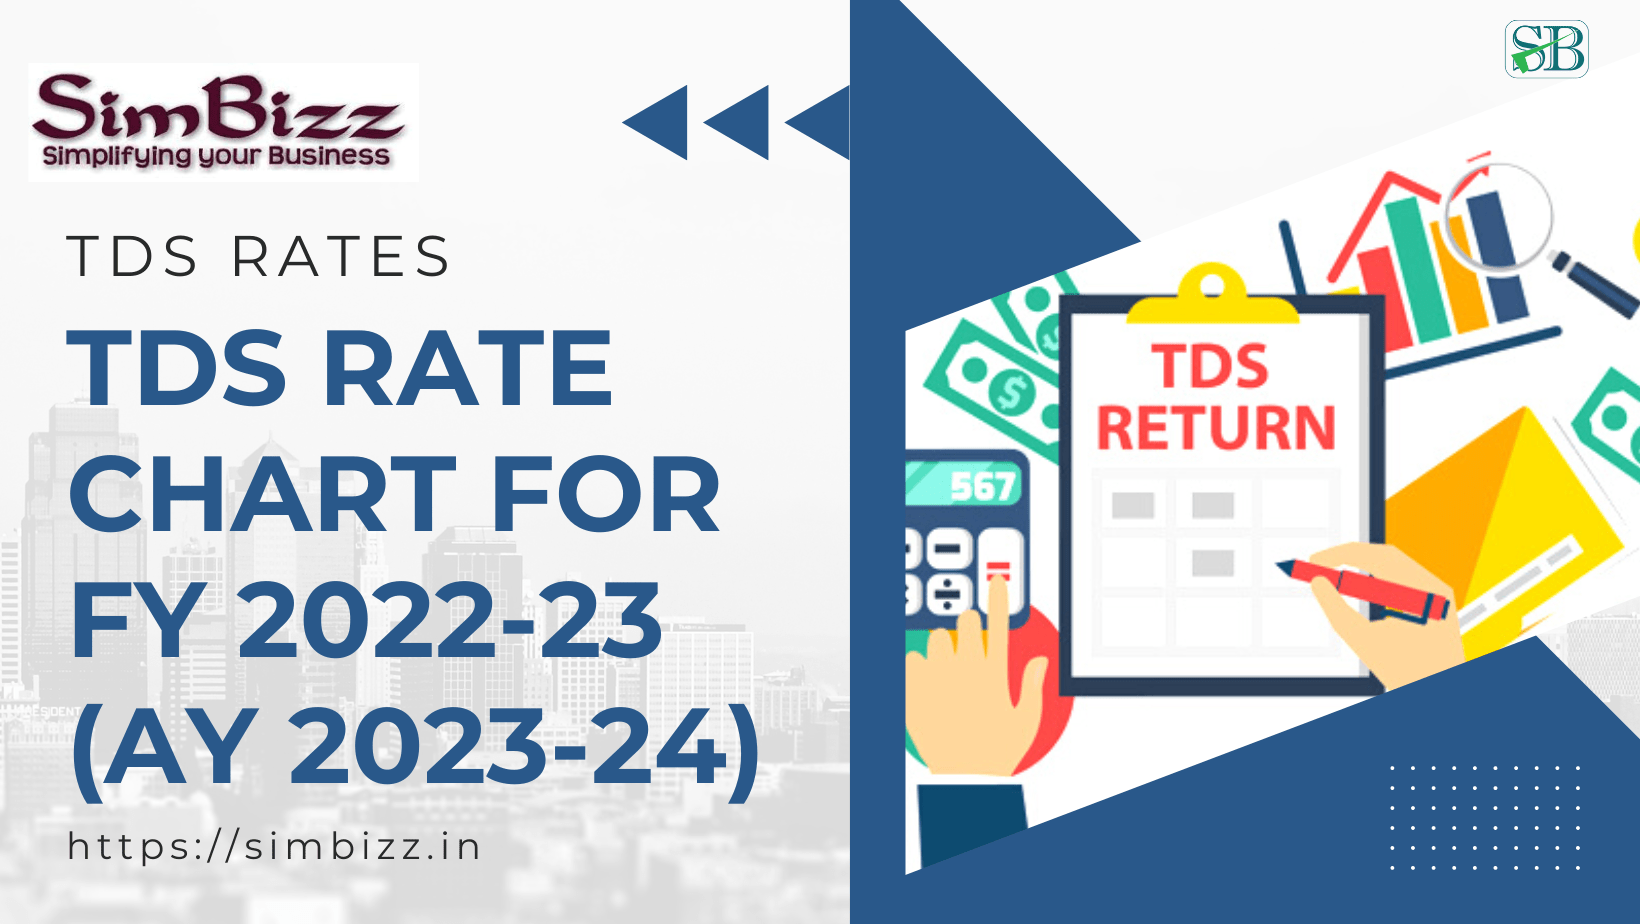 Tds Rate Chart For Fy 2022 23 Ay 2023 24 Simbizz 6896